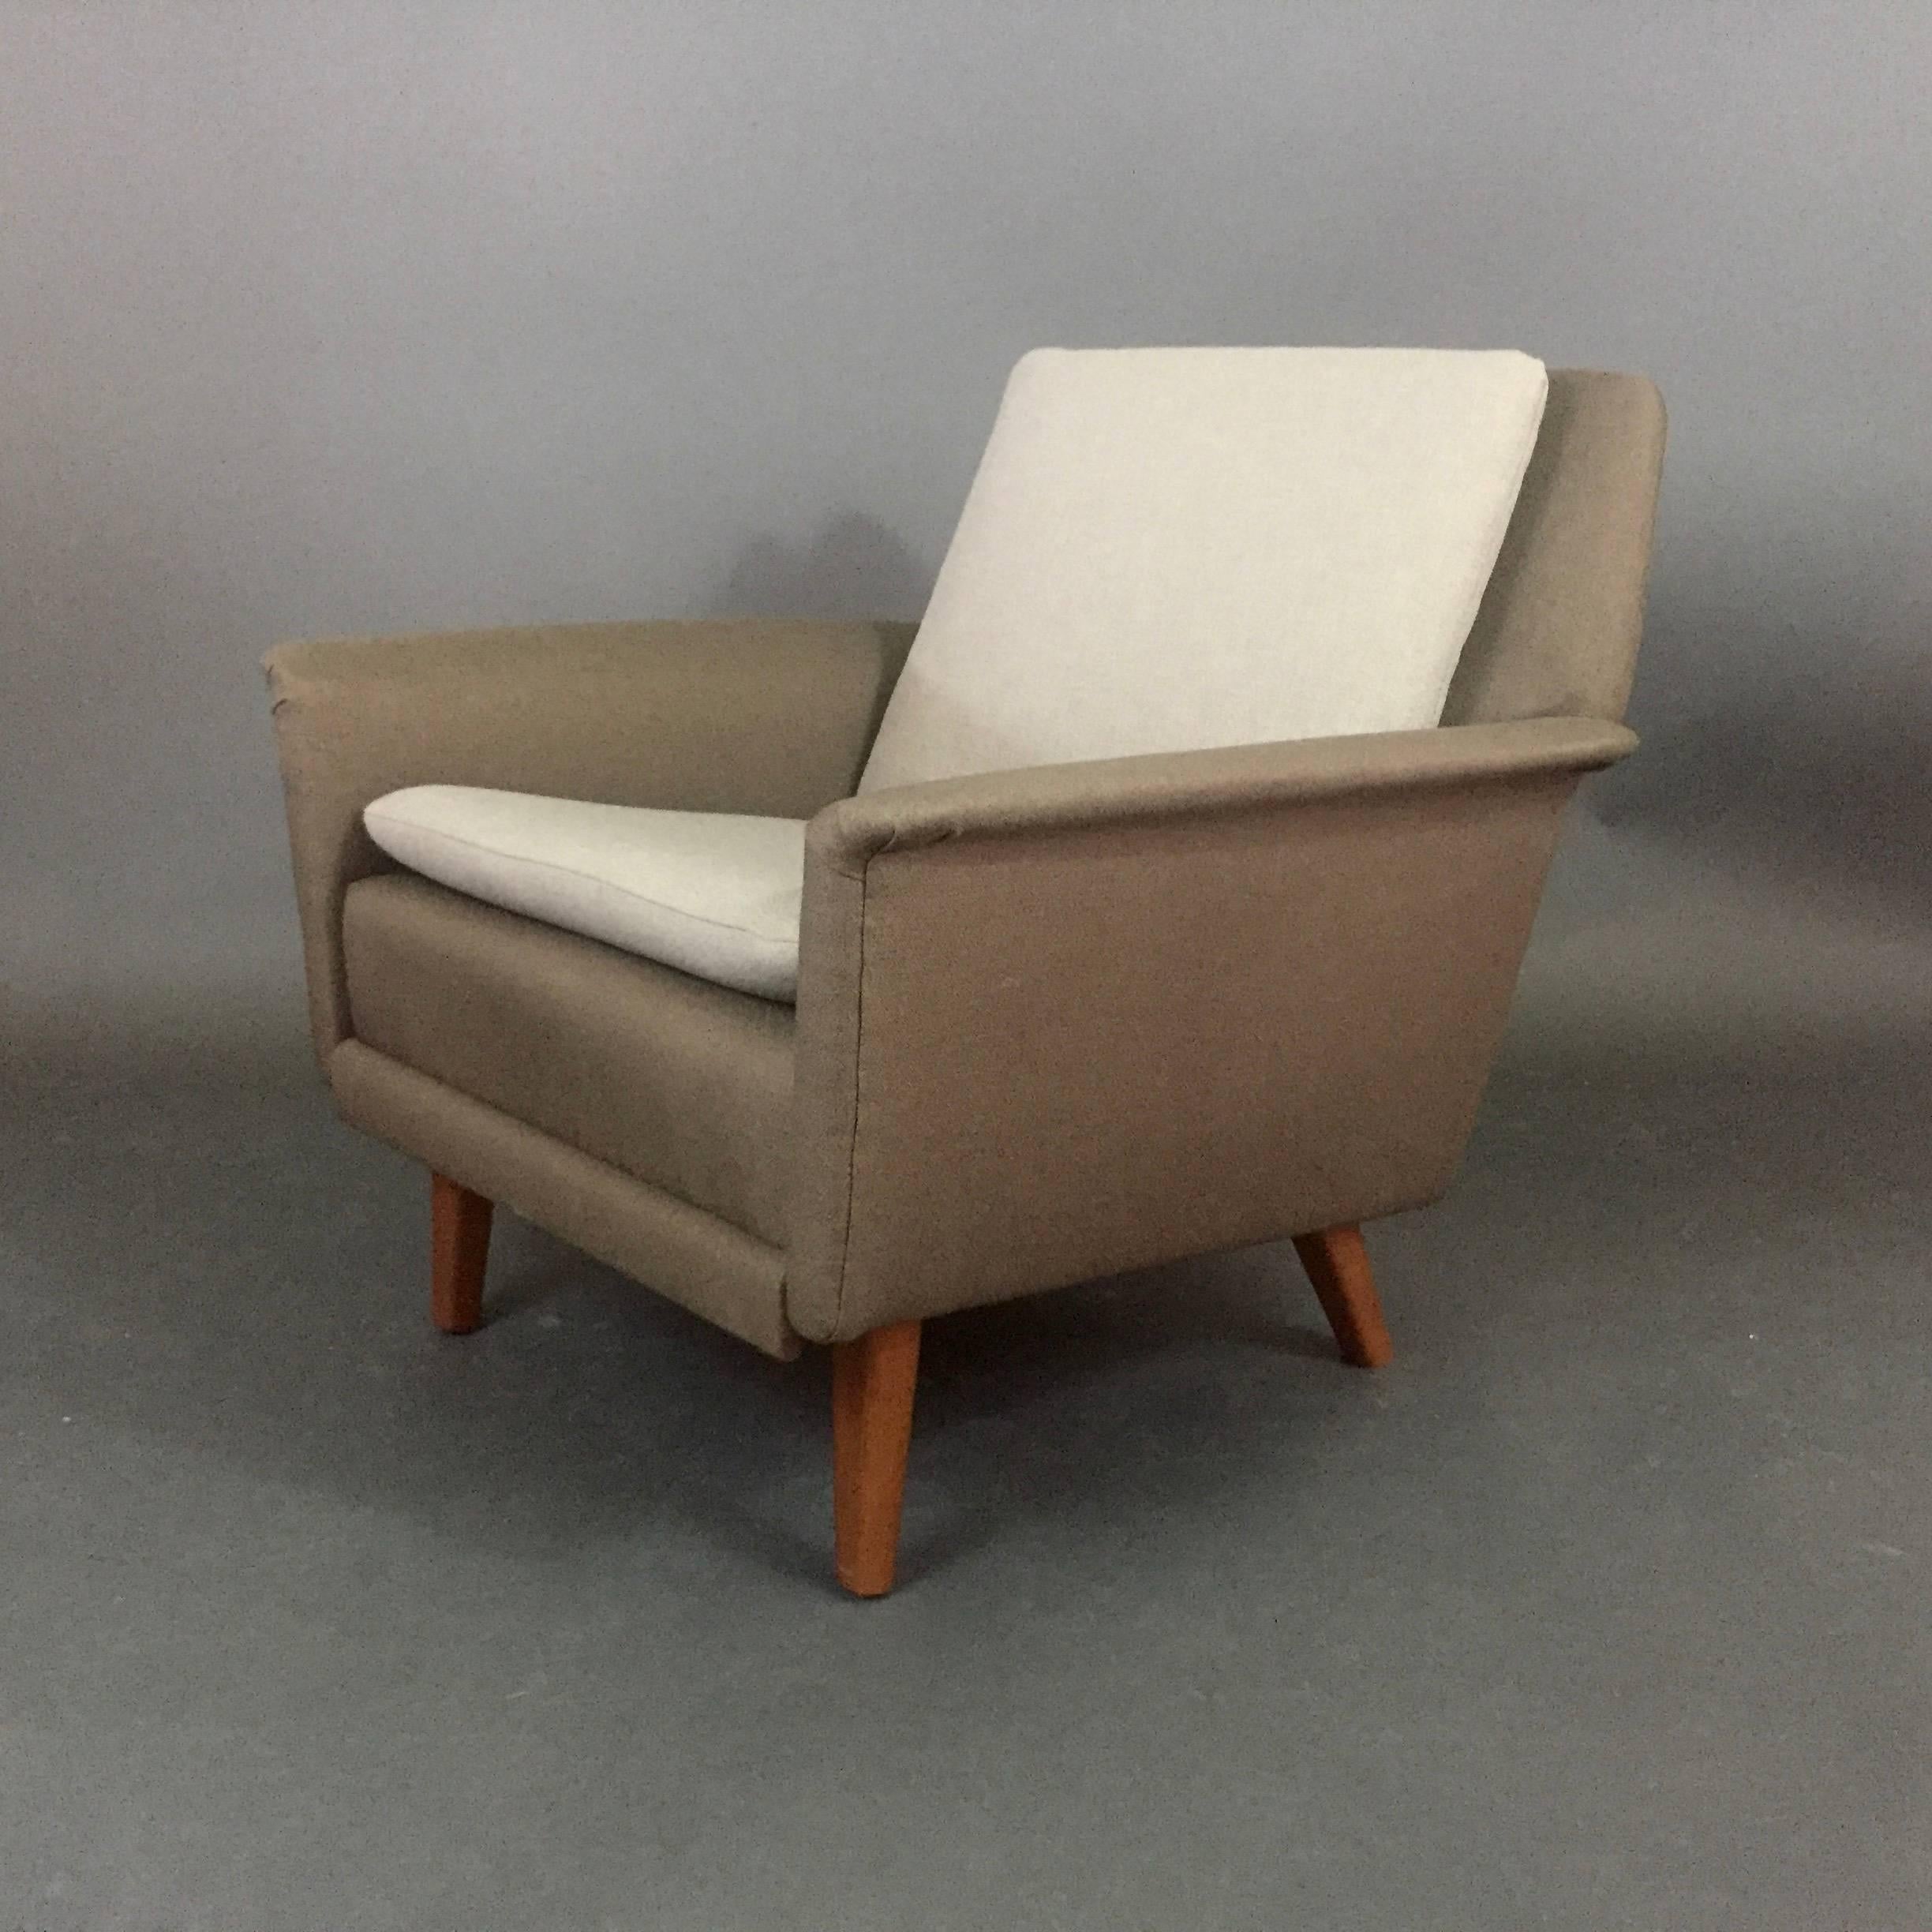 Pair of Folke Ohlsson Lounge Chairs, Denmark, 1960s For Sale 3